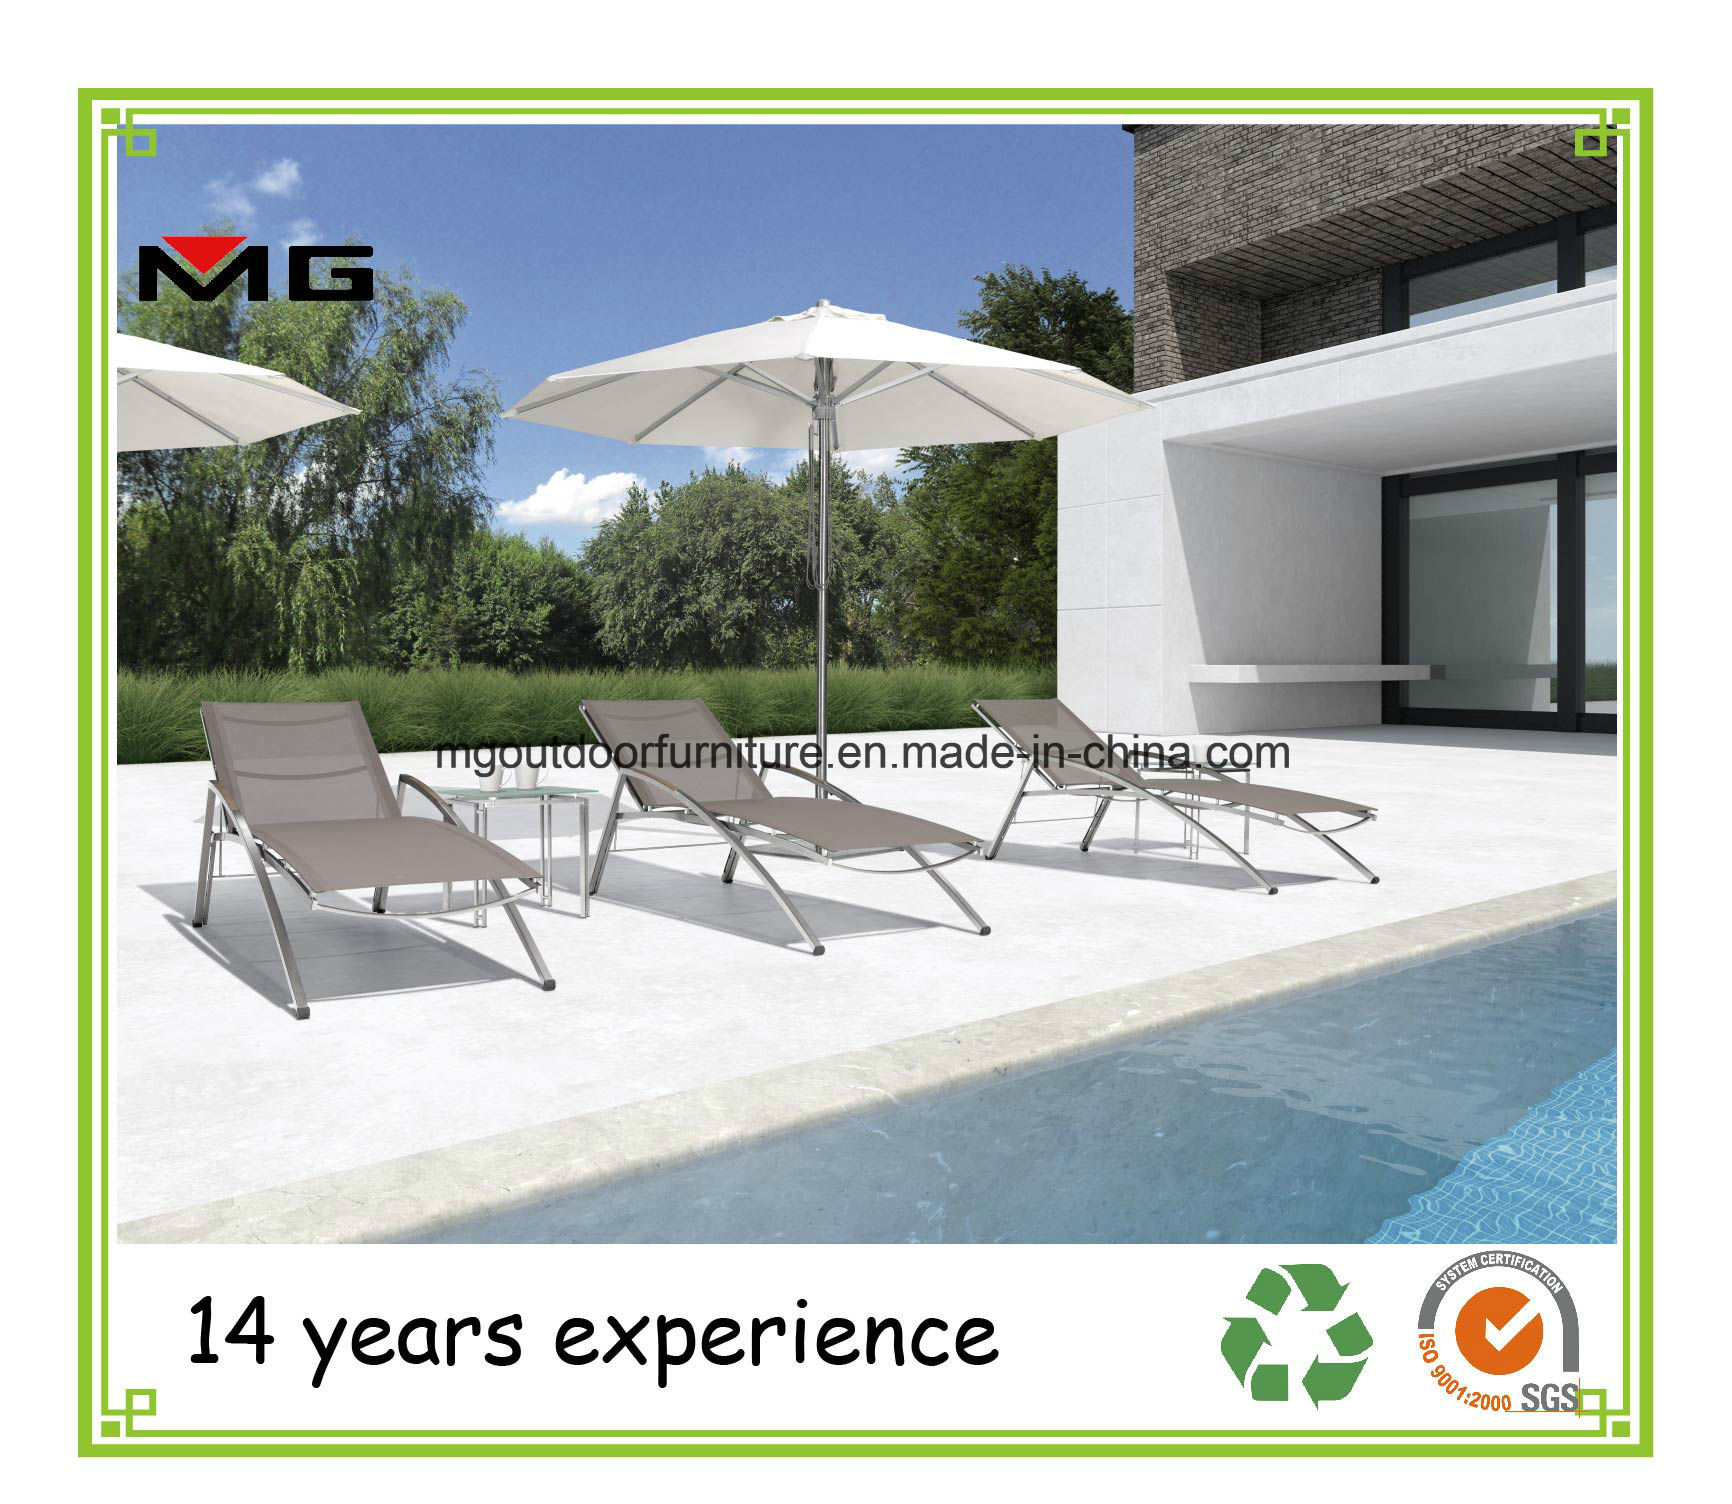 Adjustable Stainless Steel Outdoor Chaise Lounges with Teak Armrest